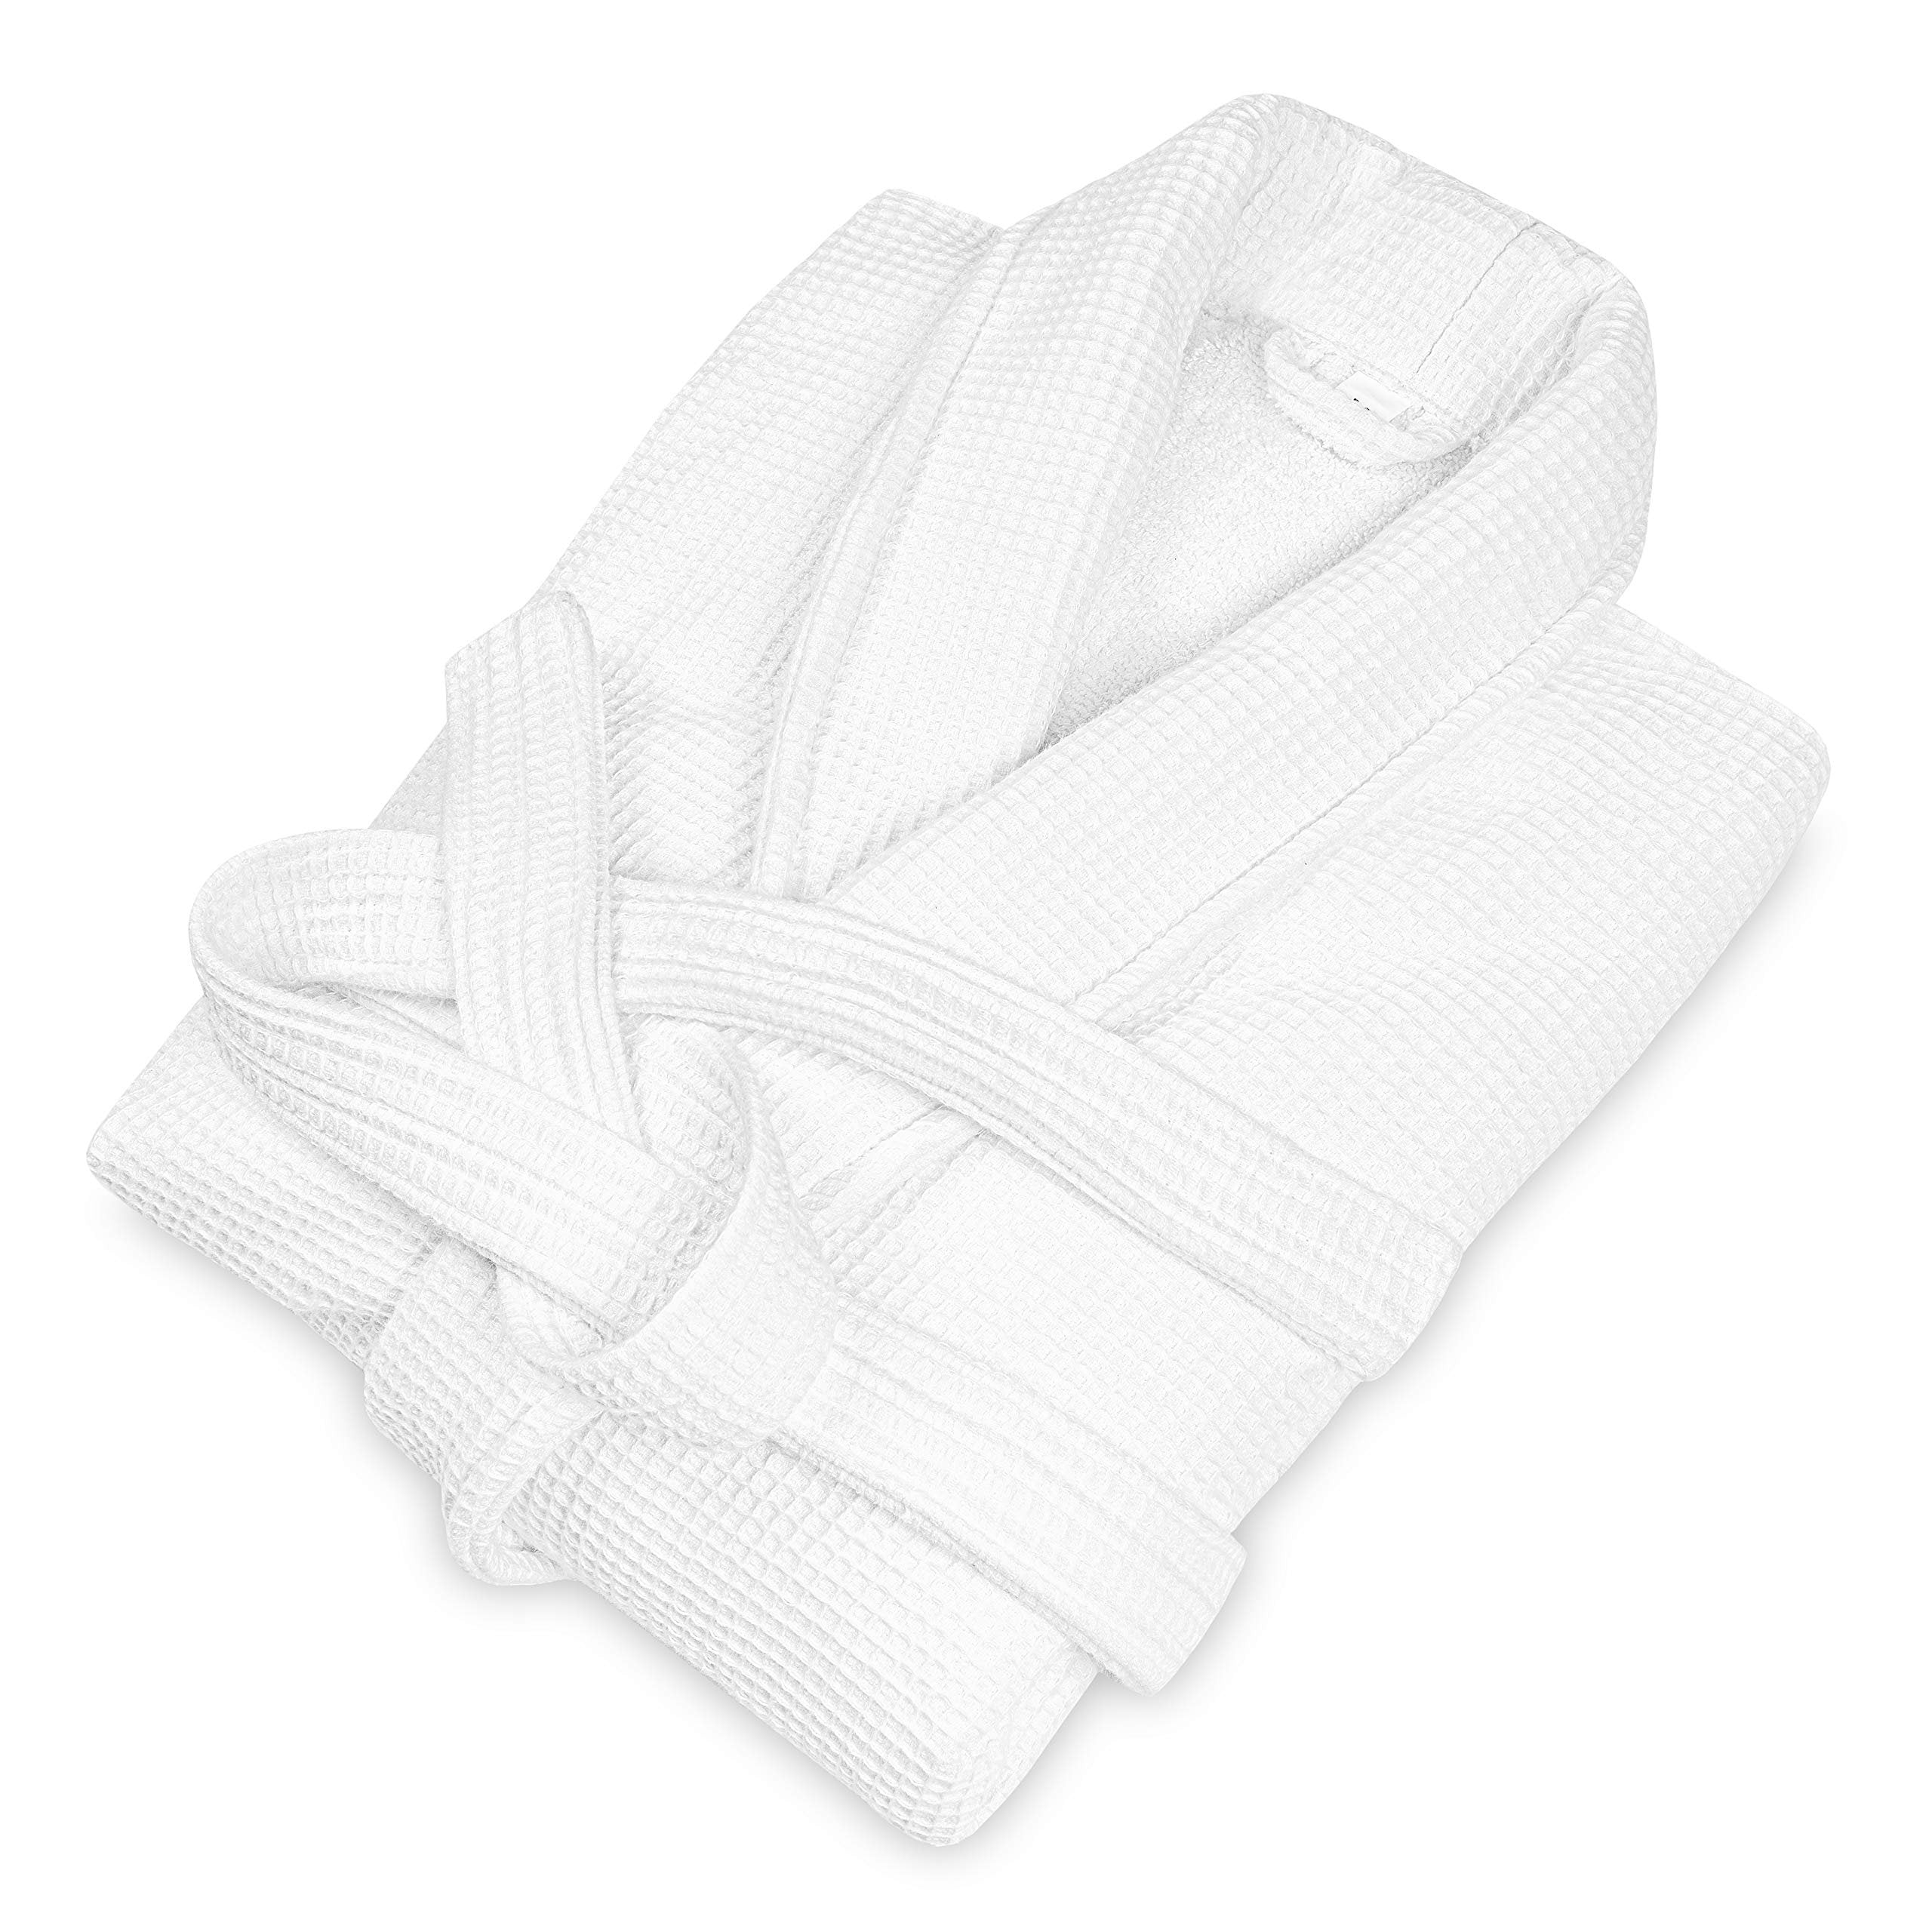 Luxury White Bath Robe Unisex, Cotton waffle bathrobe large for Spa, Shower, Hotel, House, lightweight soft terry bathrobes long size, Quick Dry terrycloth robes absorbent (L/XL)